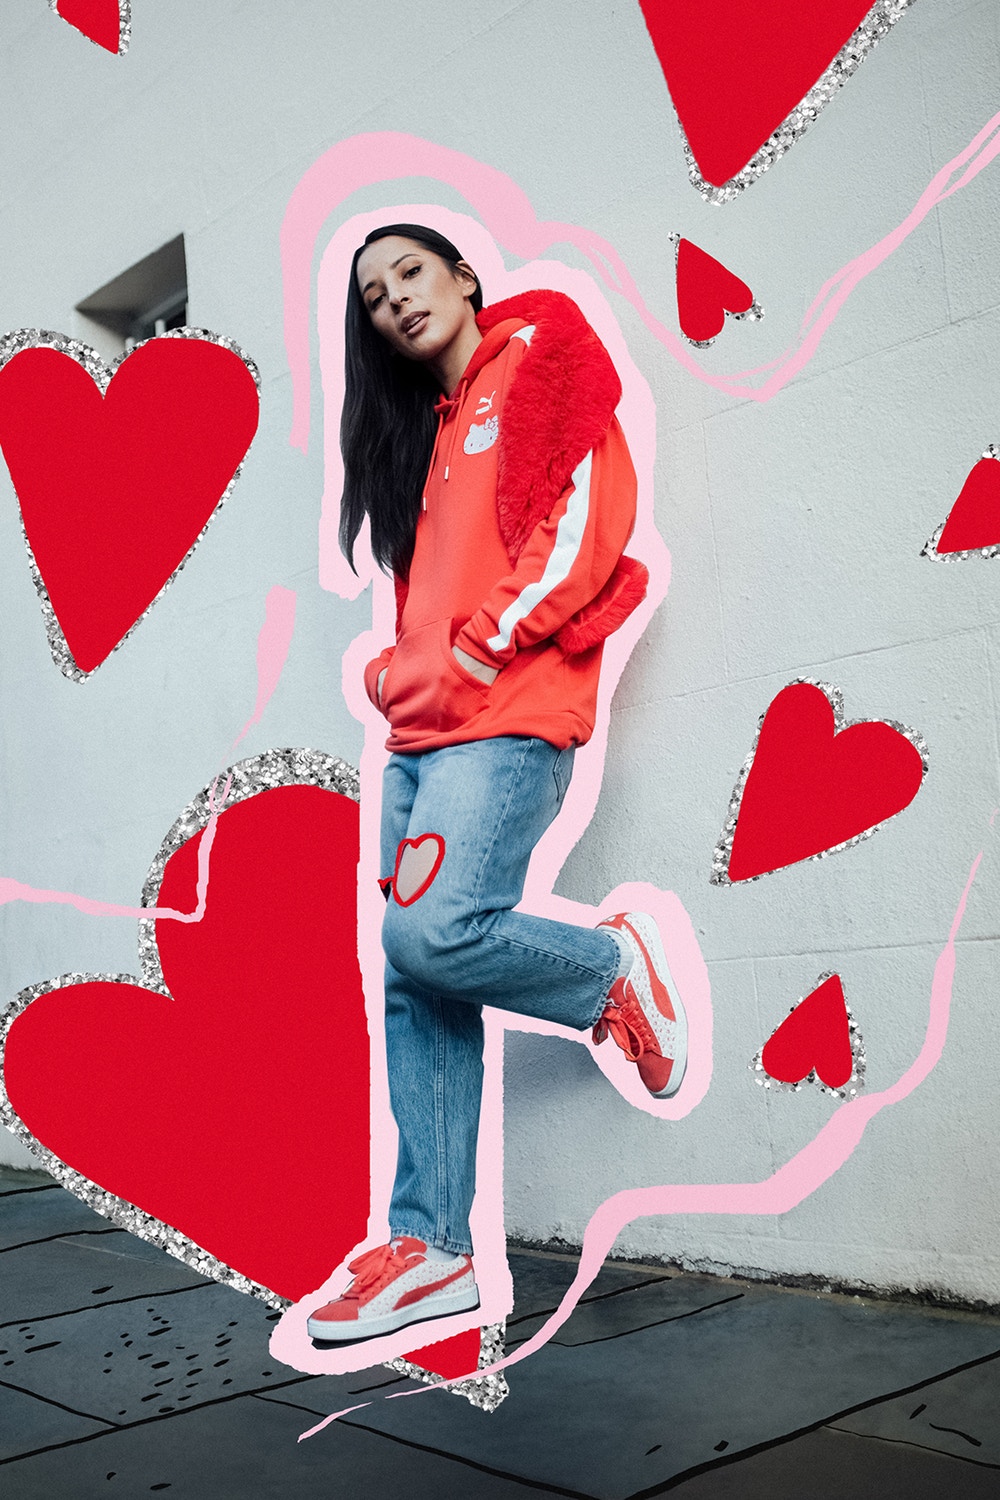 Things Get Adorable In The New Hello Kitty & Puma Collaboration — CNK Daily  (ChicksNKicks)